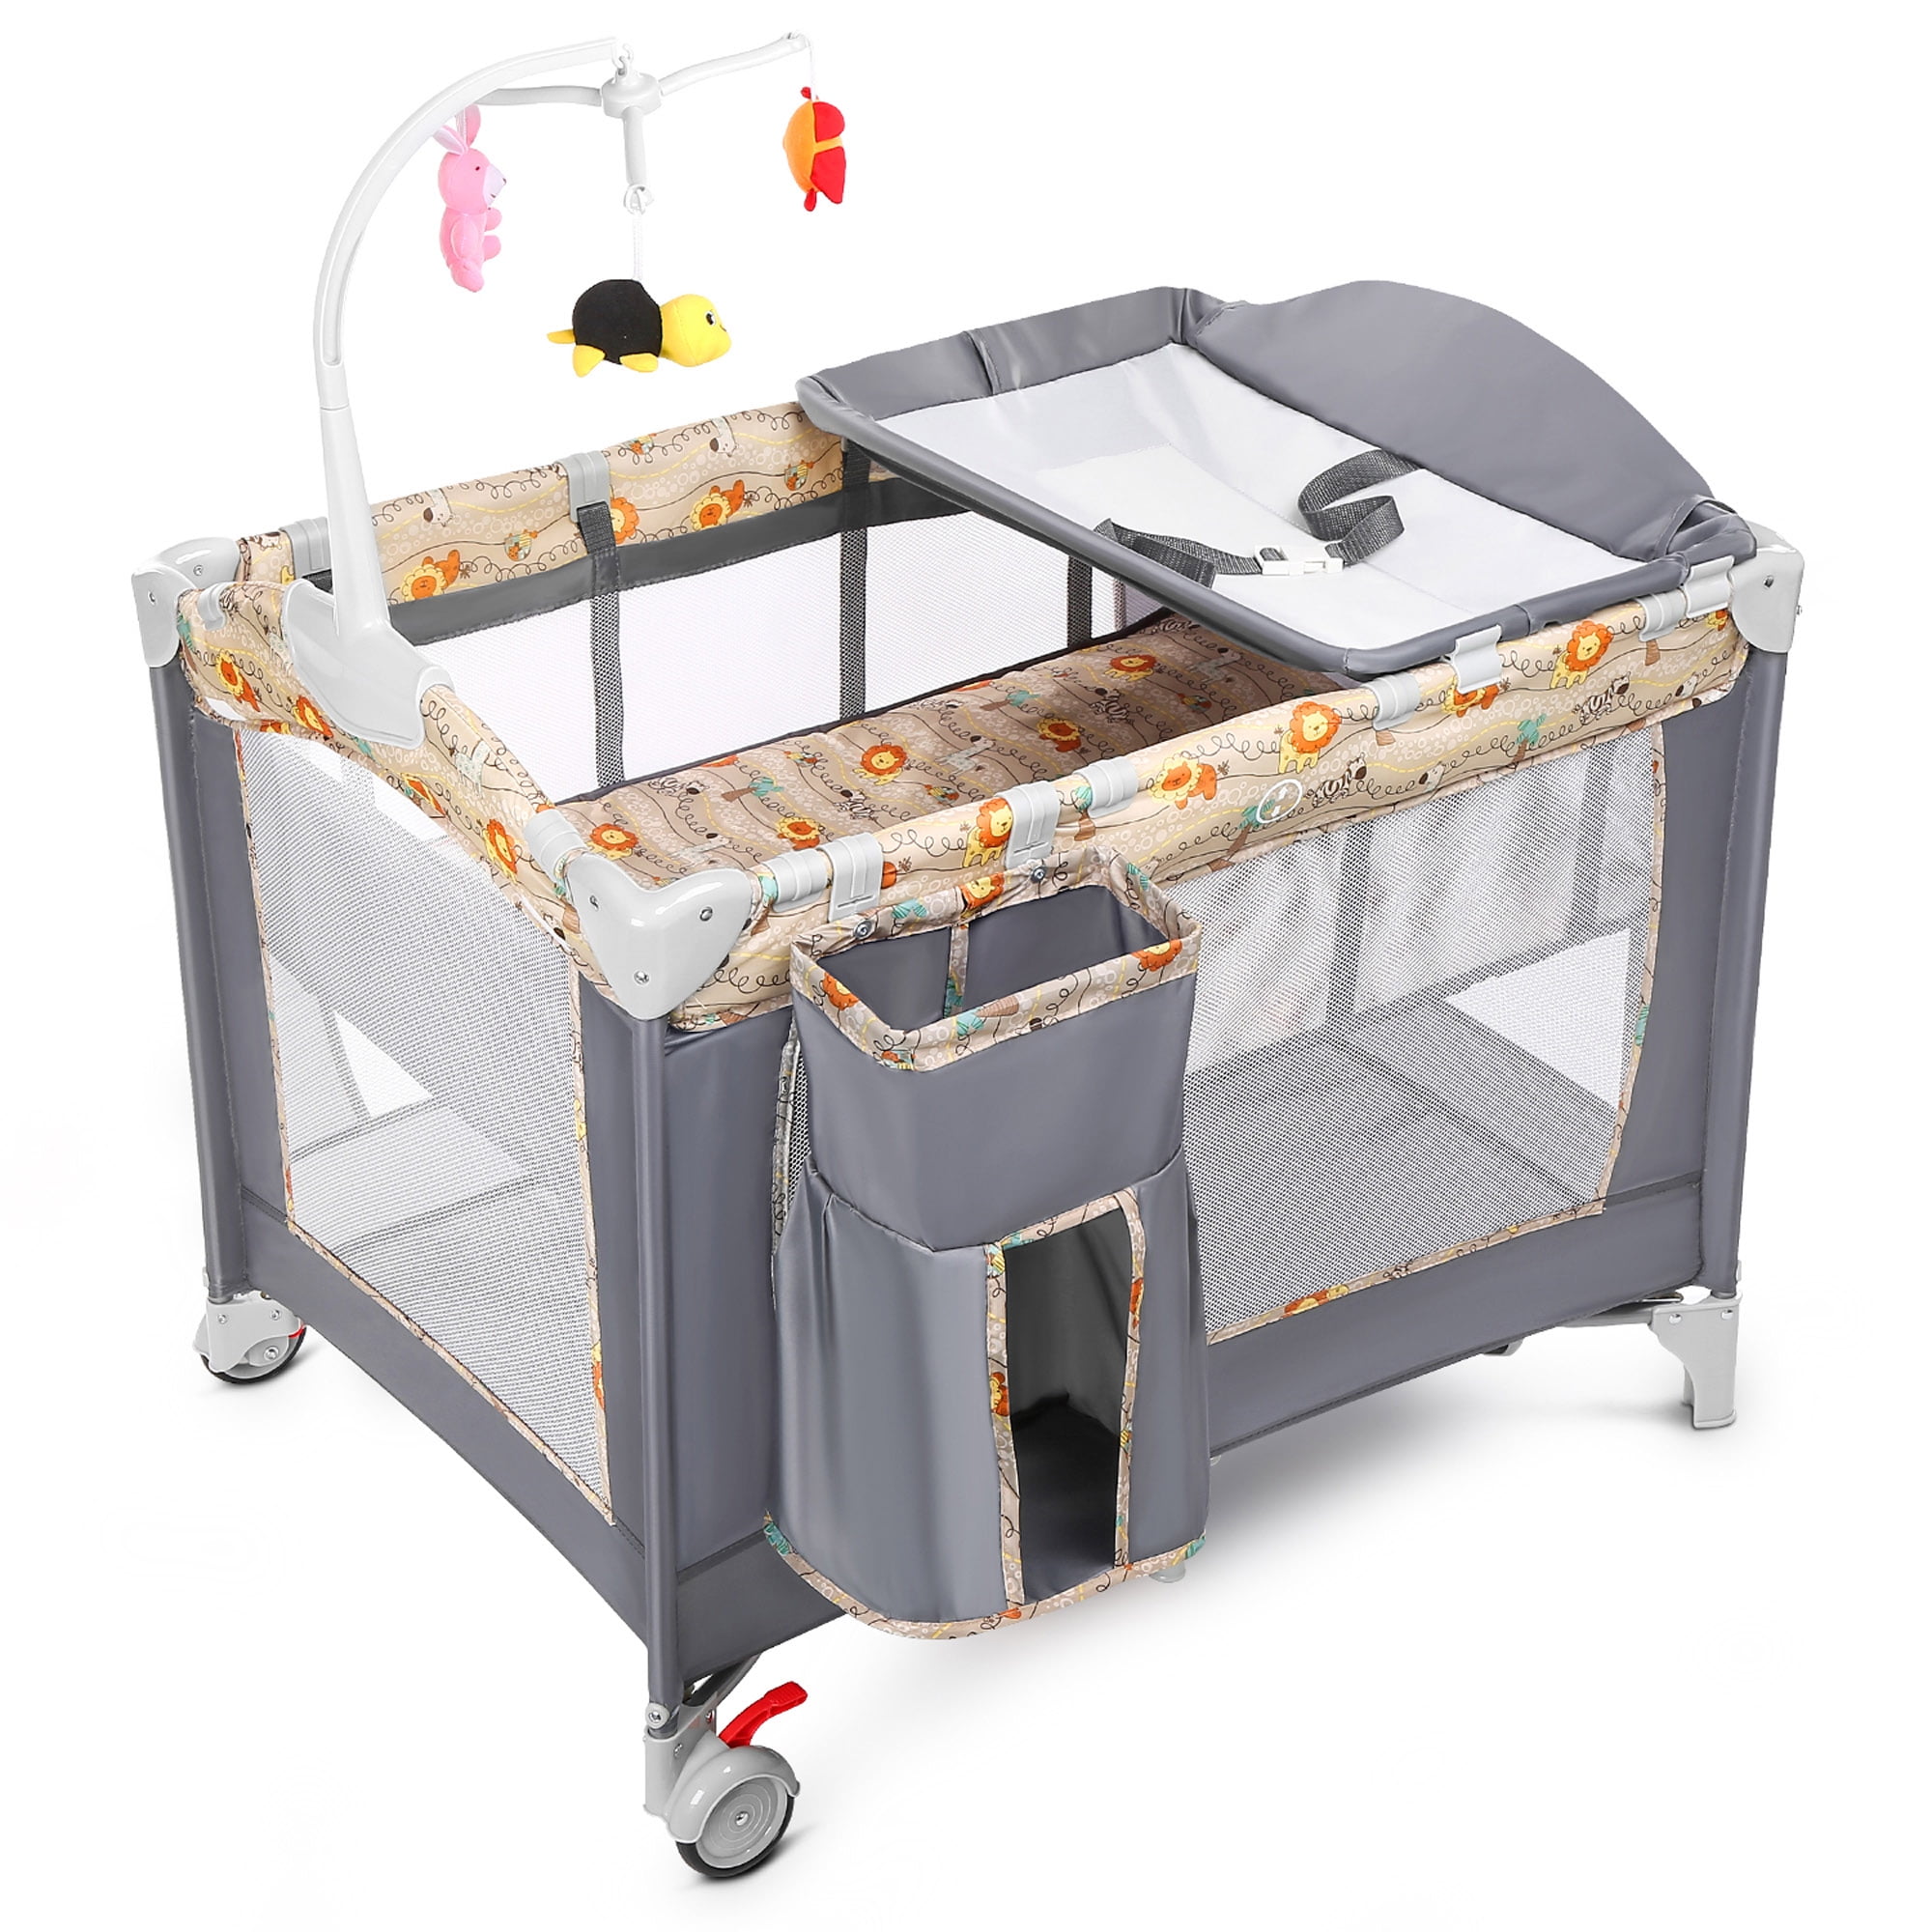 Topbuy 3 in 1 Convertible Baby Playards Portable Baby Playpen with 